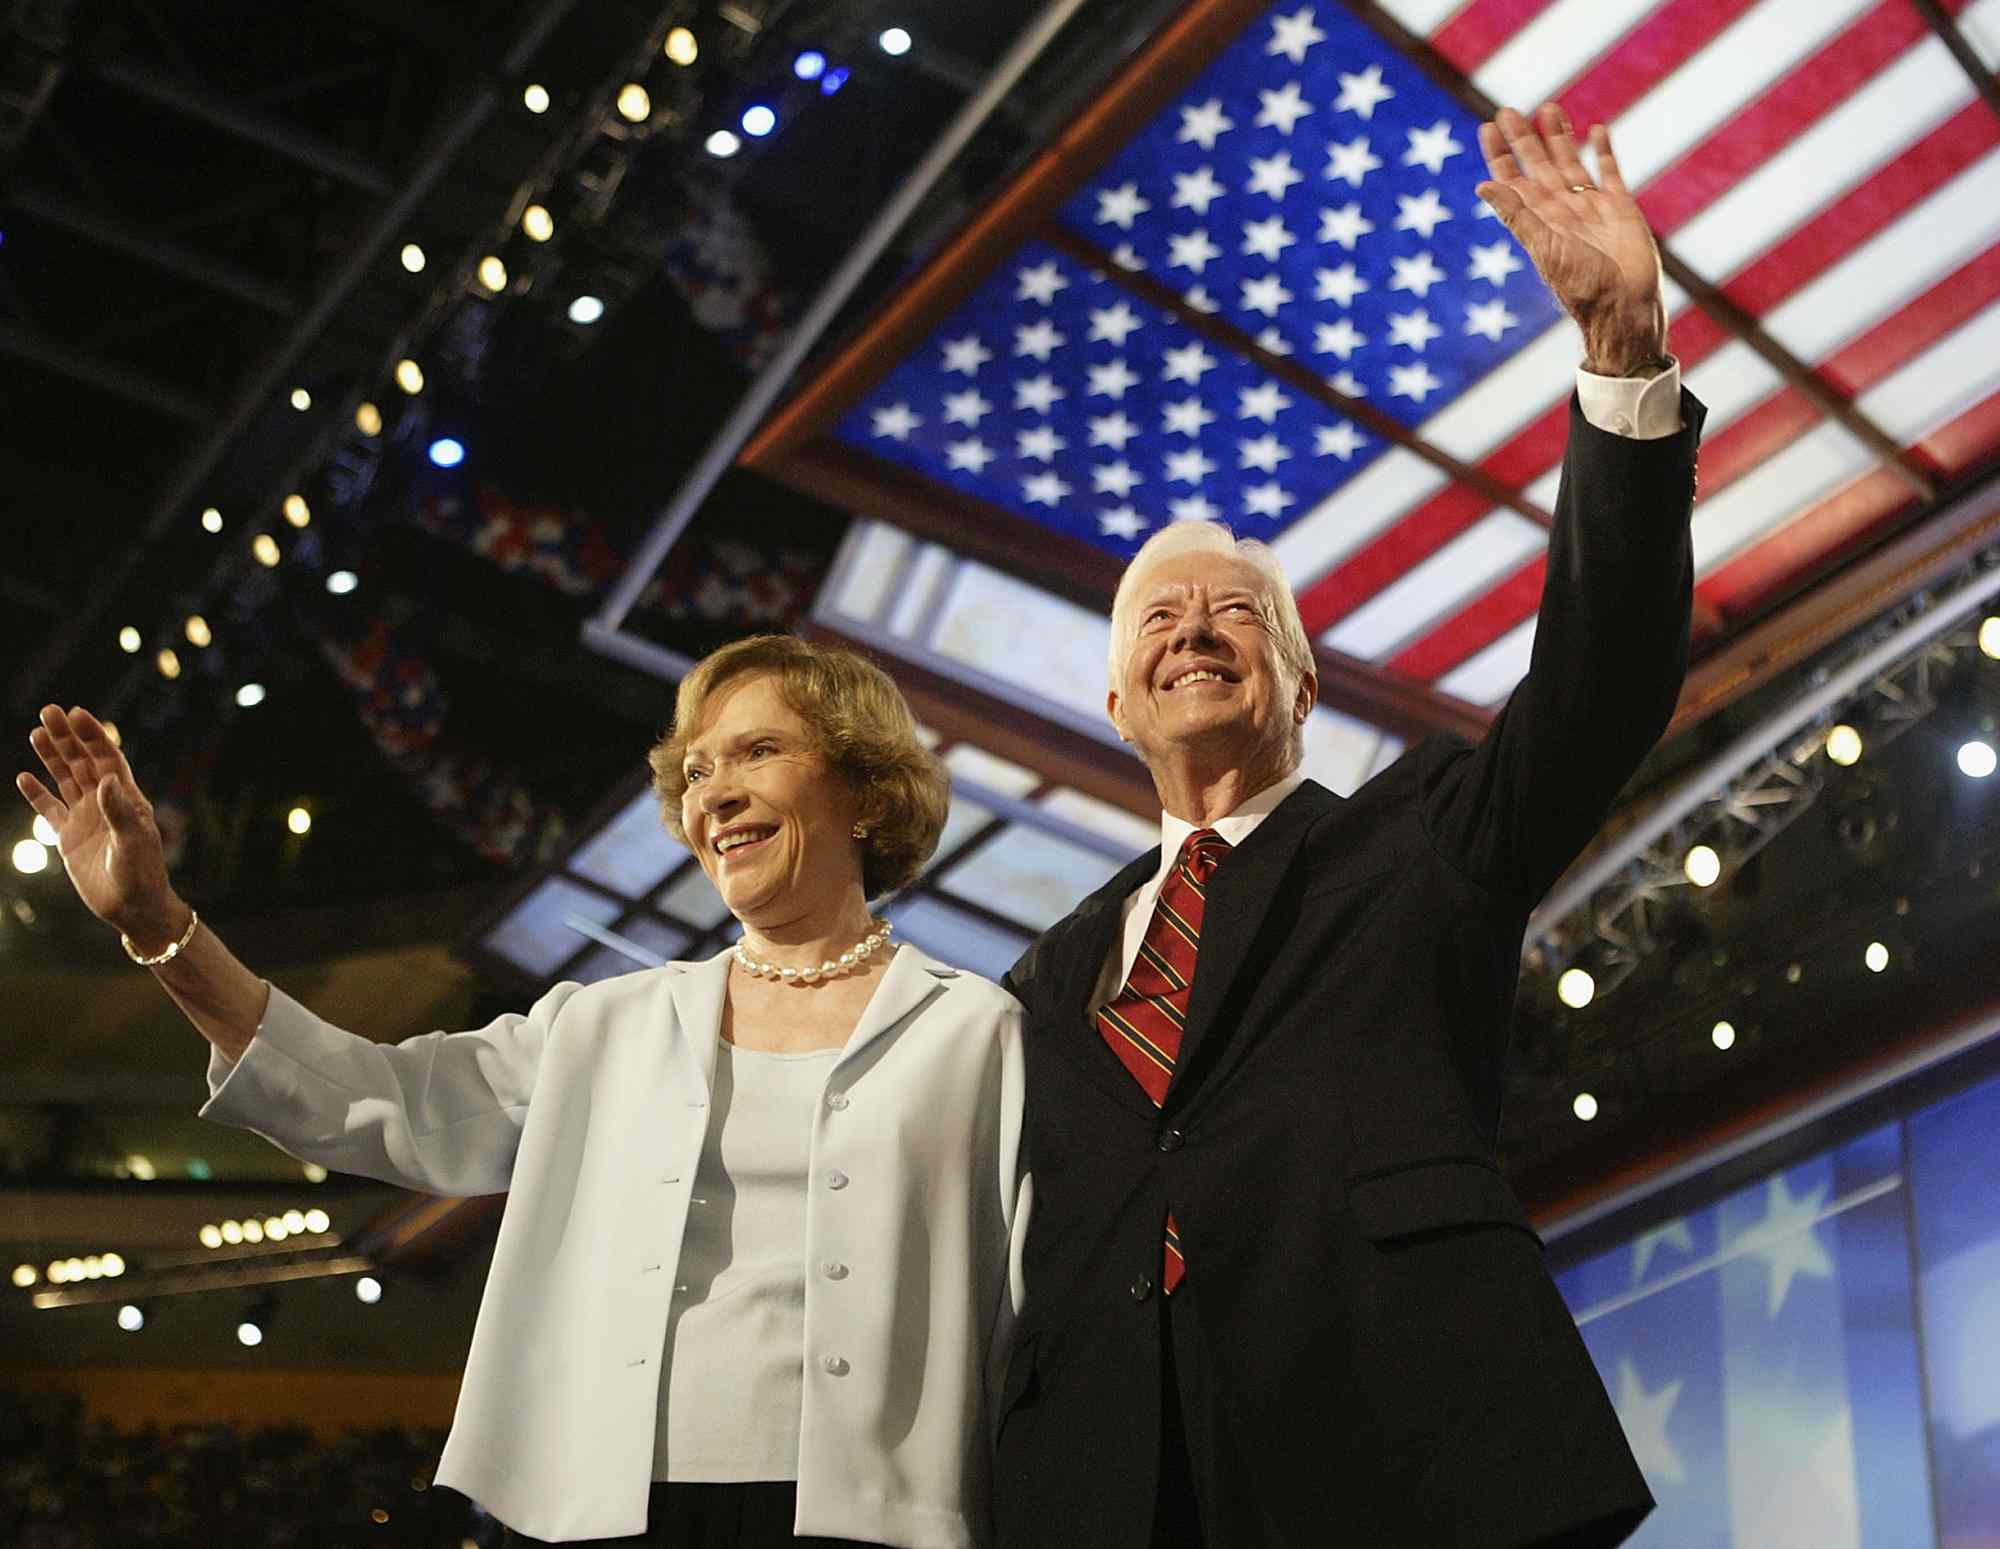 Former U.S. President Jimmy Carter and his wife Rosalynn wave to the audience during the Democratic National Convention at the FleetCenter July 26, 2004 in Boston, Massachusetts. Democratic presidential candidate U.S. Senator John Kerry (D-MA) is expected to accept his party's nomination later in the week